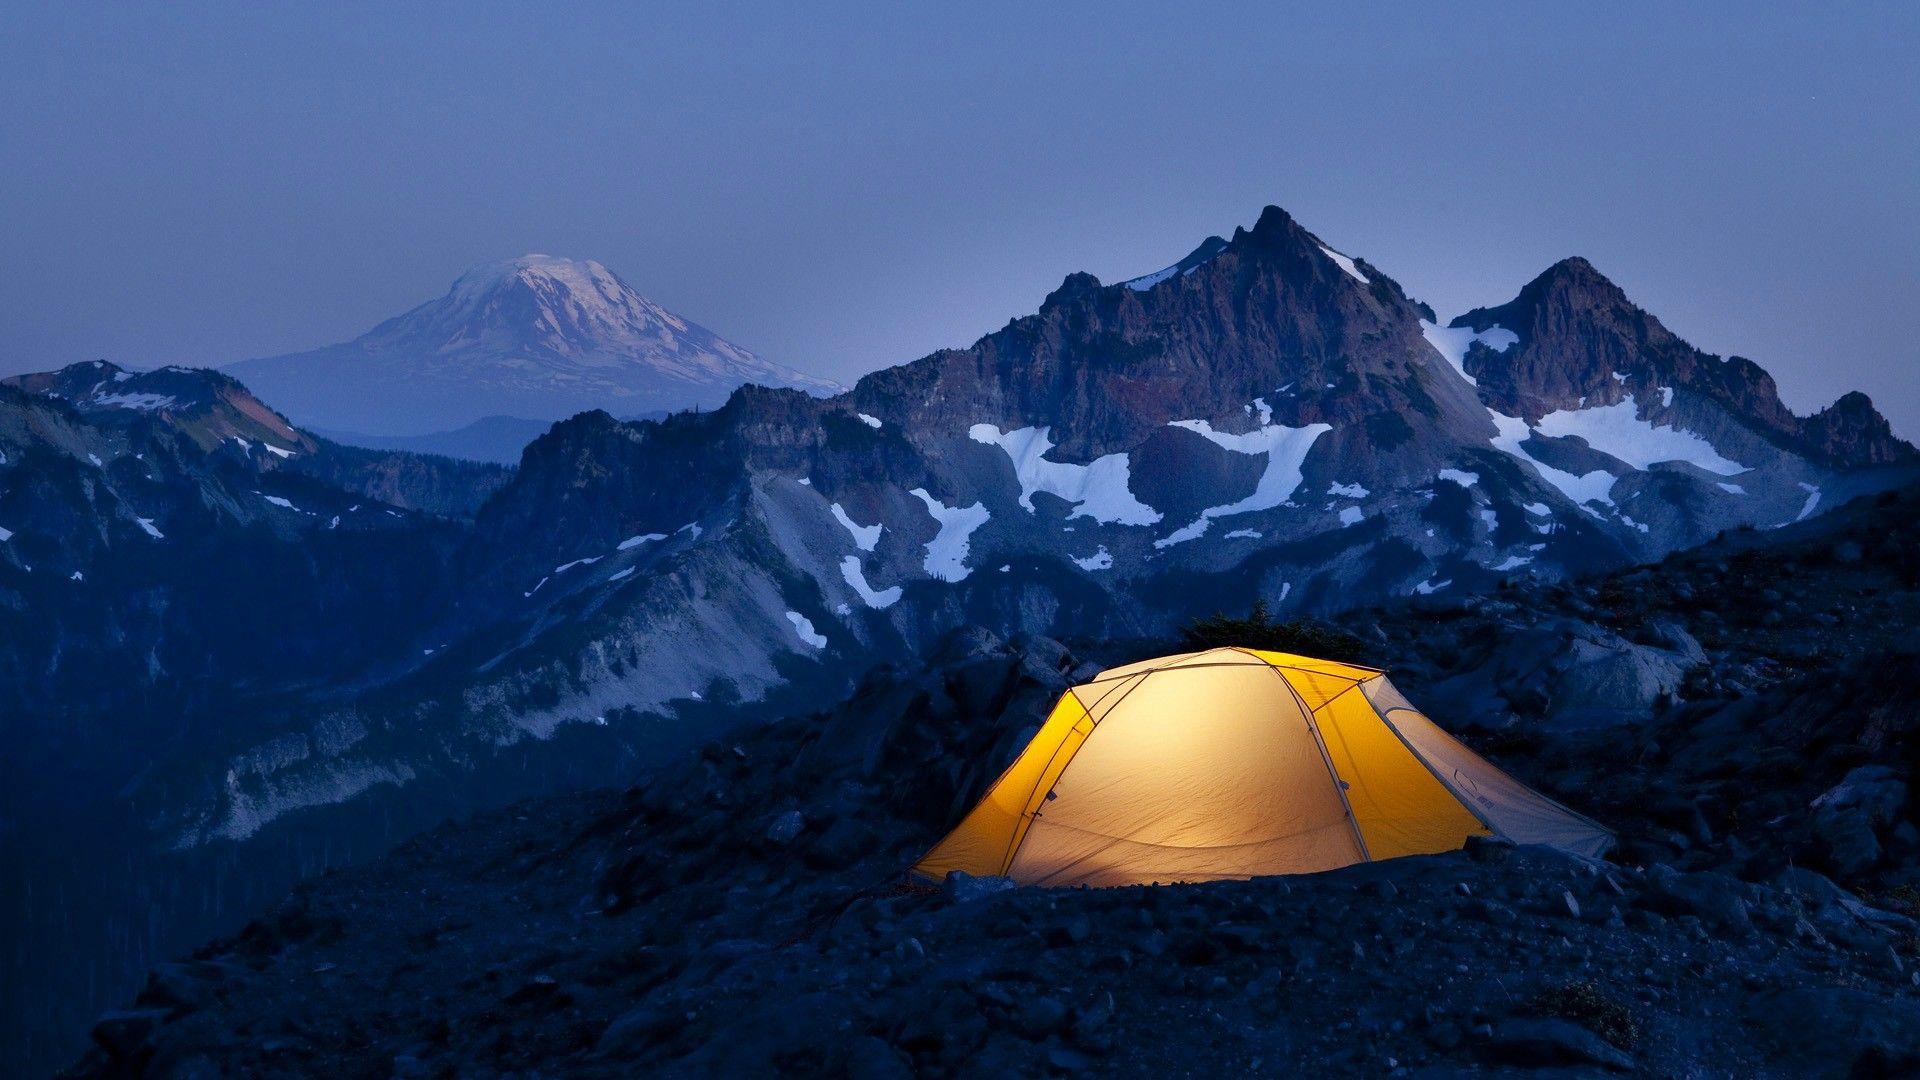 Mountain Camping Wallpapers - Top Free Mountain Camping Backgrounds ...